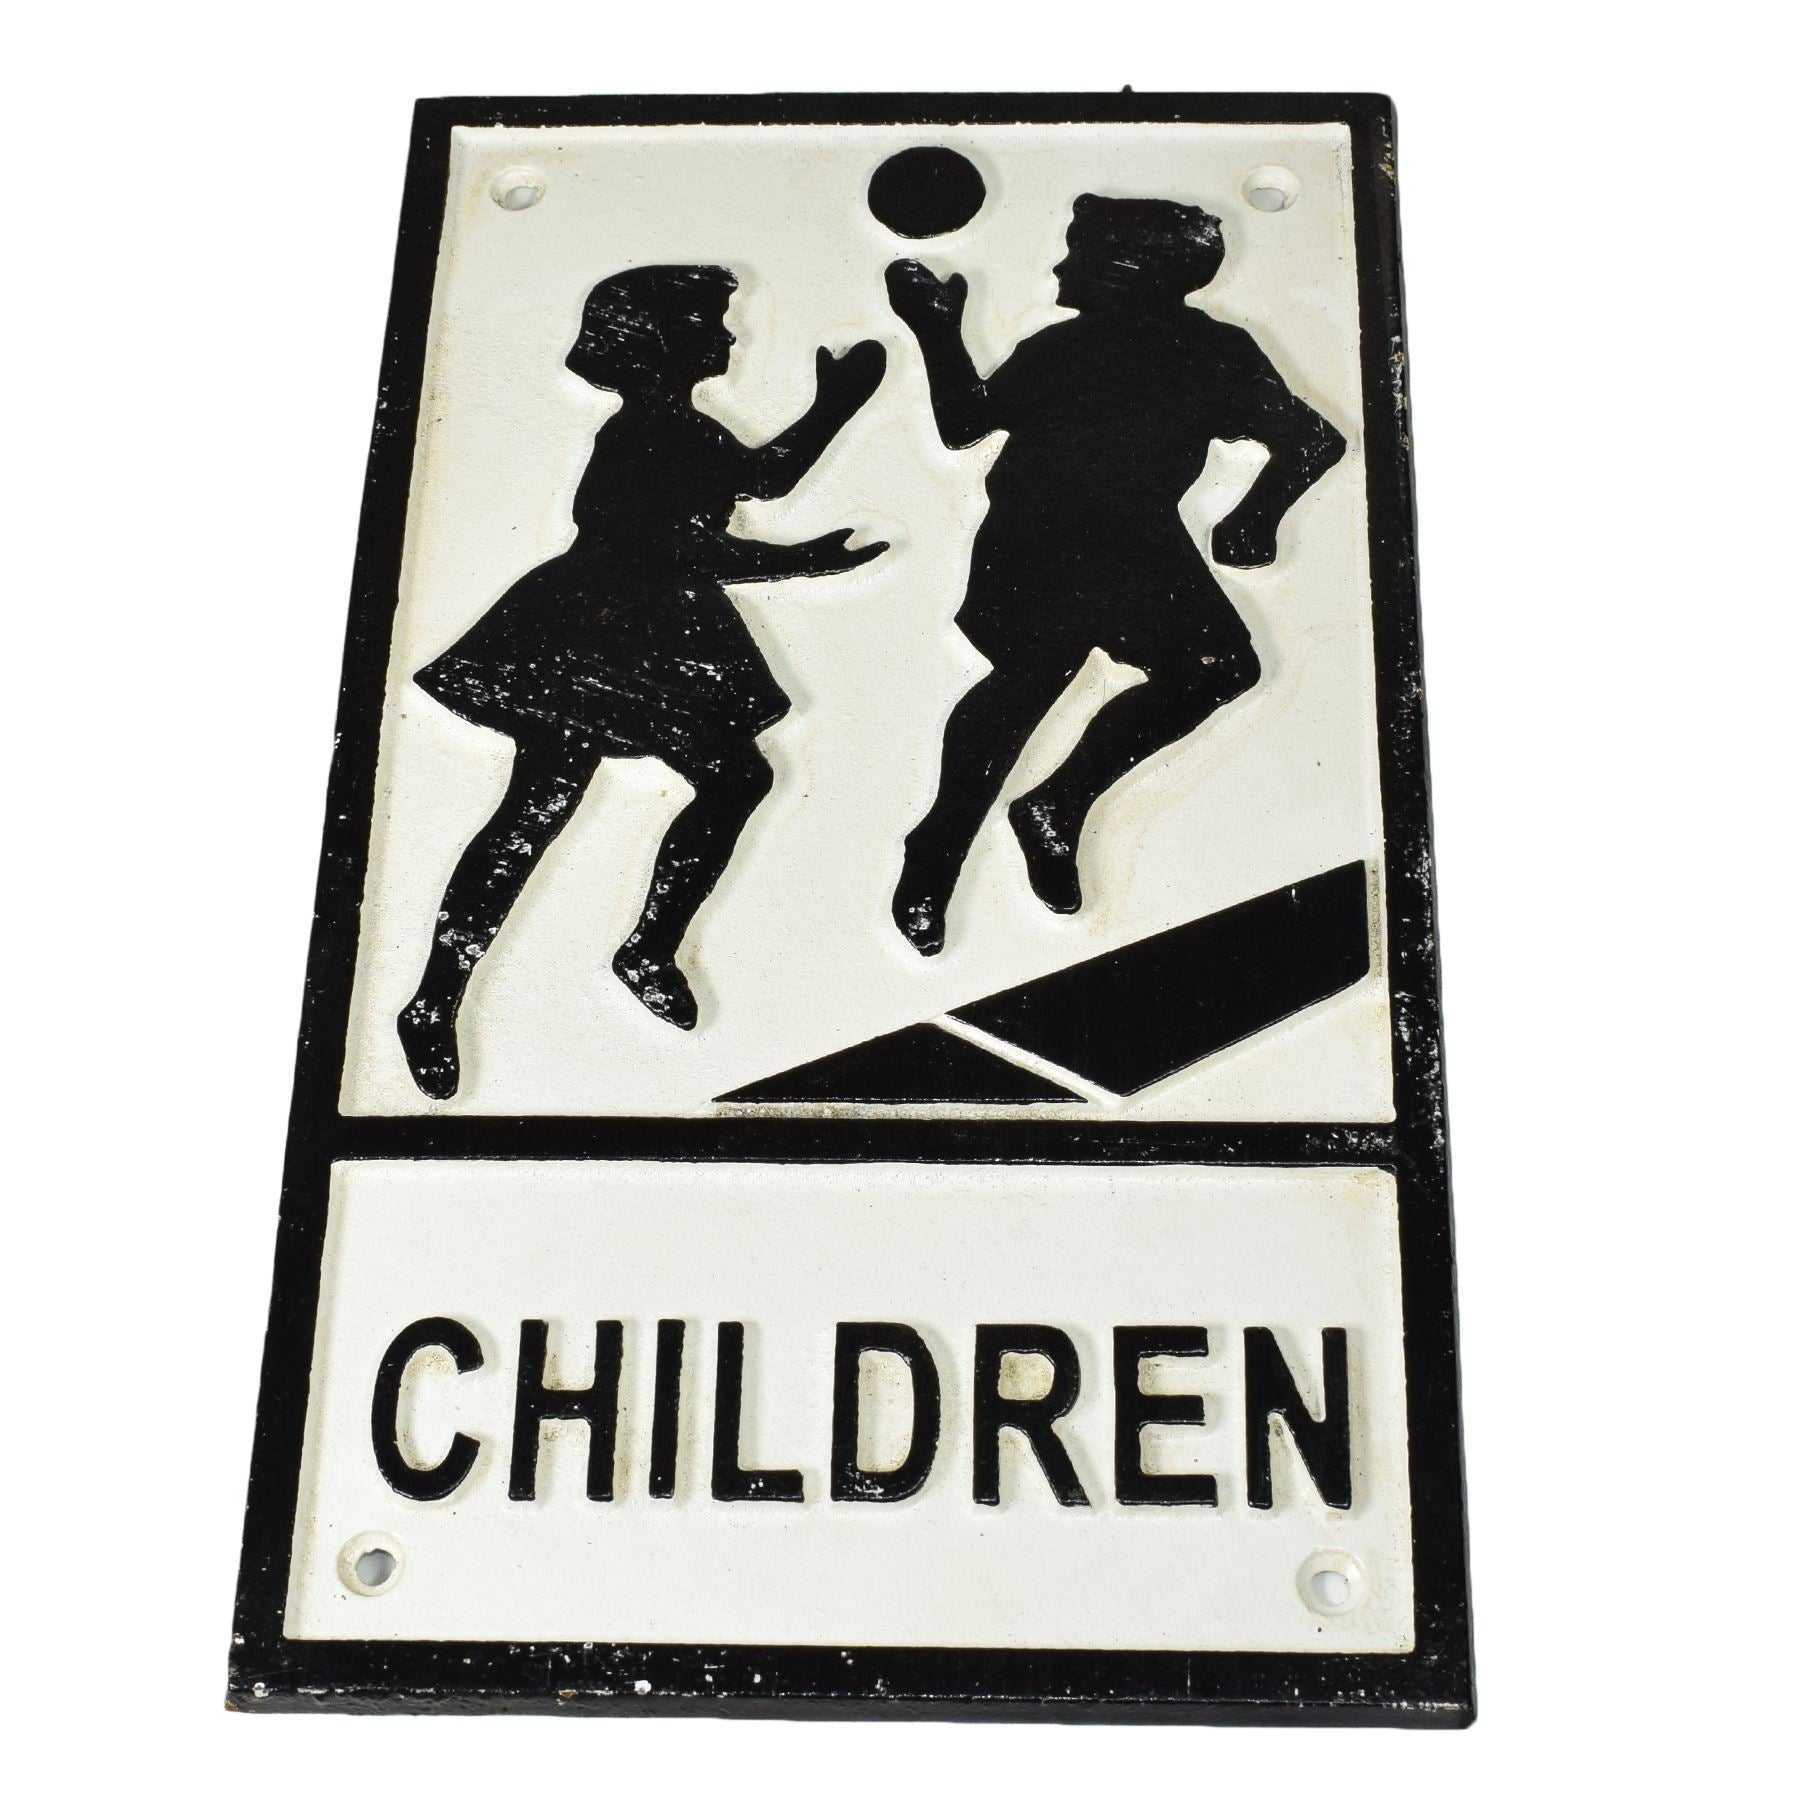 "Children" Playing Cast Iron Sign Plaque Door Wall House Fence Gate Post